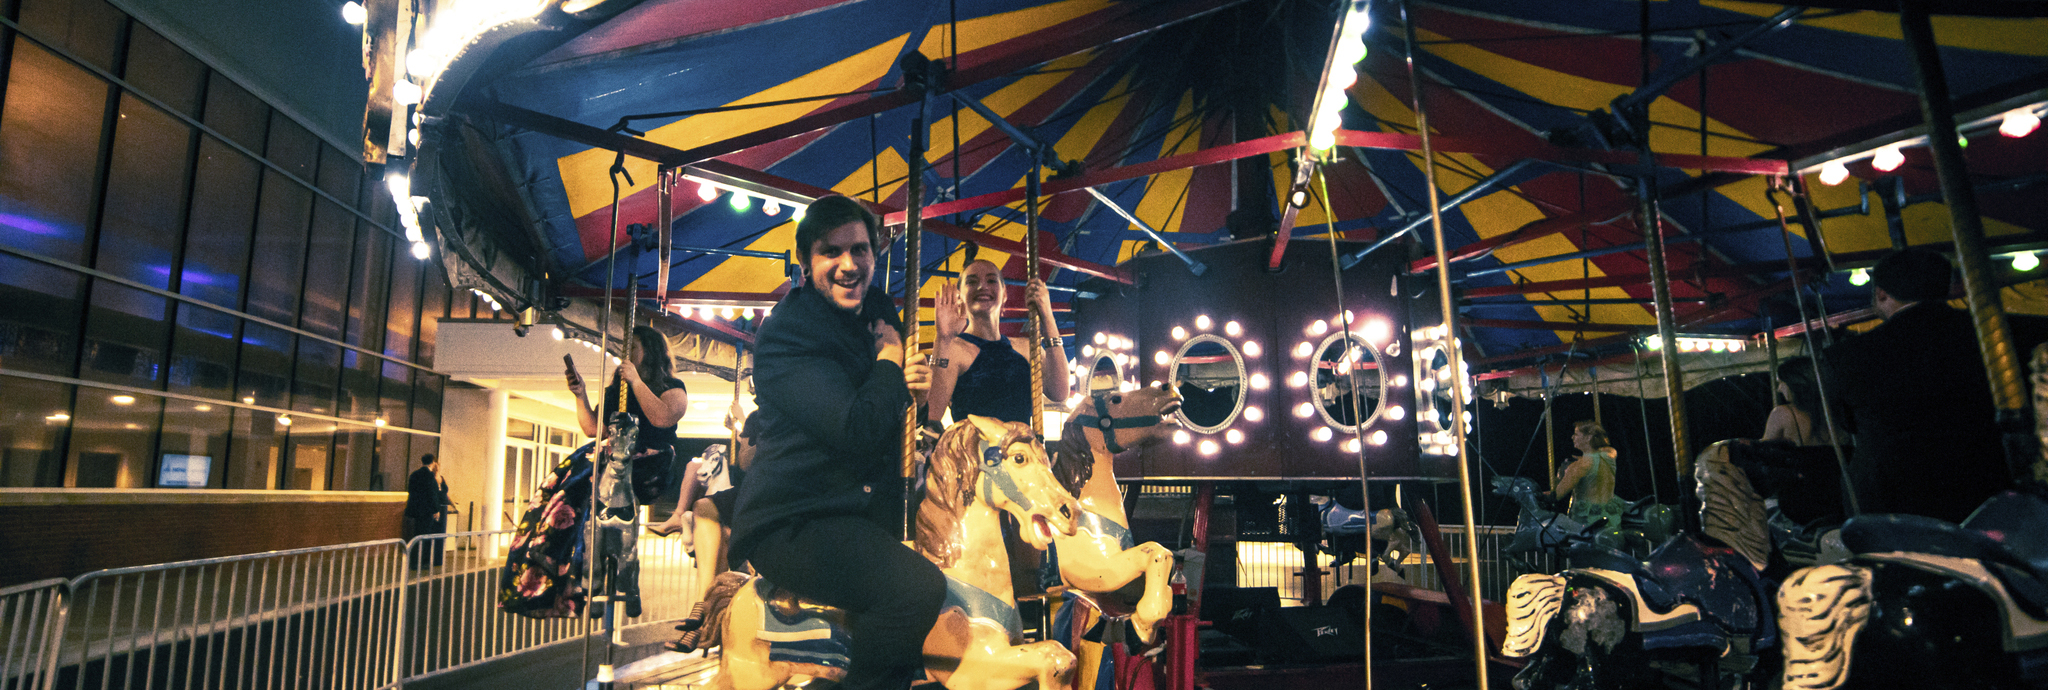 Patrons riding a Carousel at The Willows